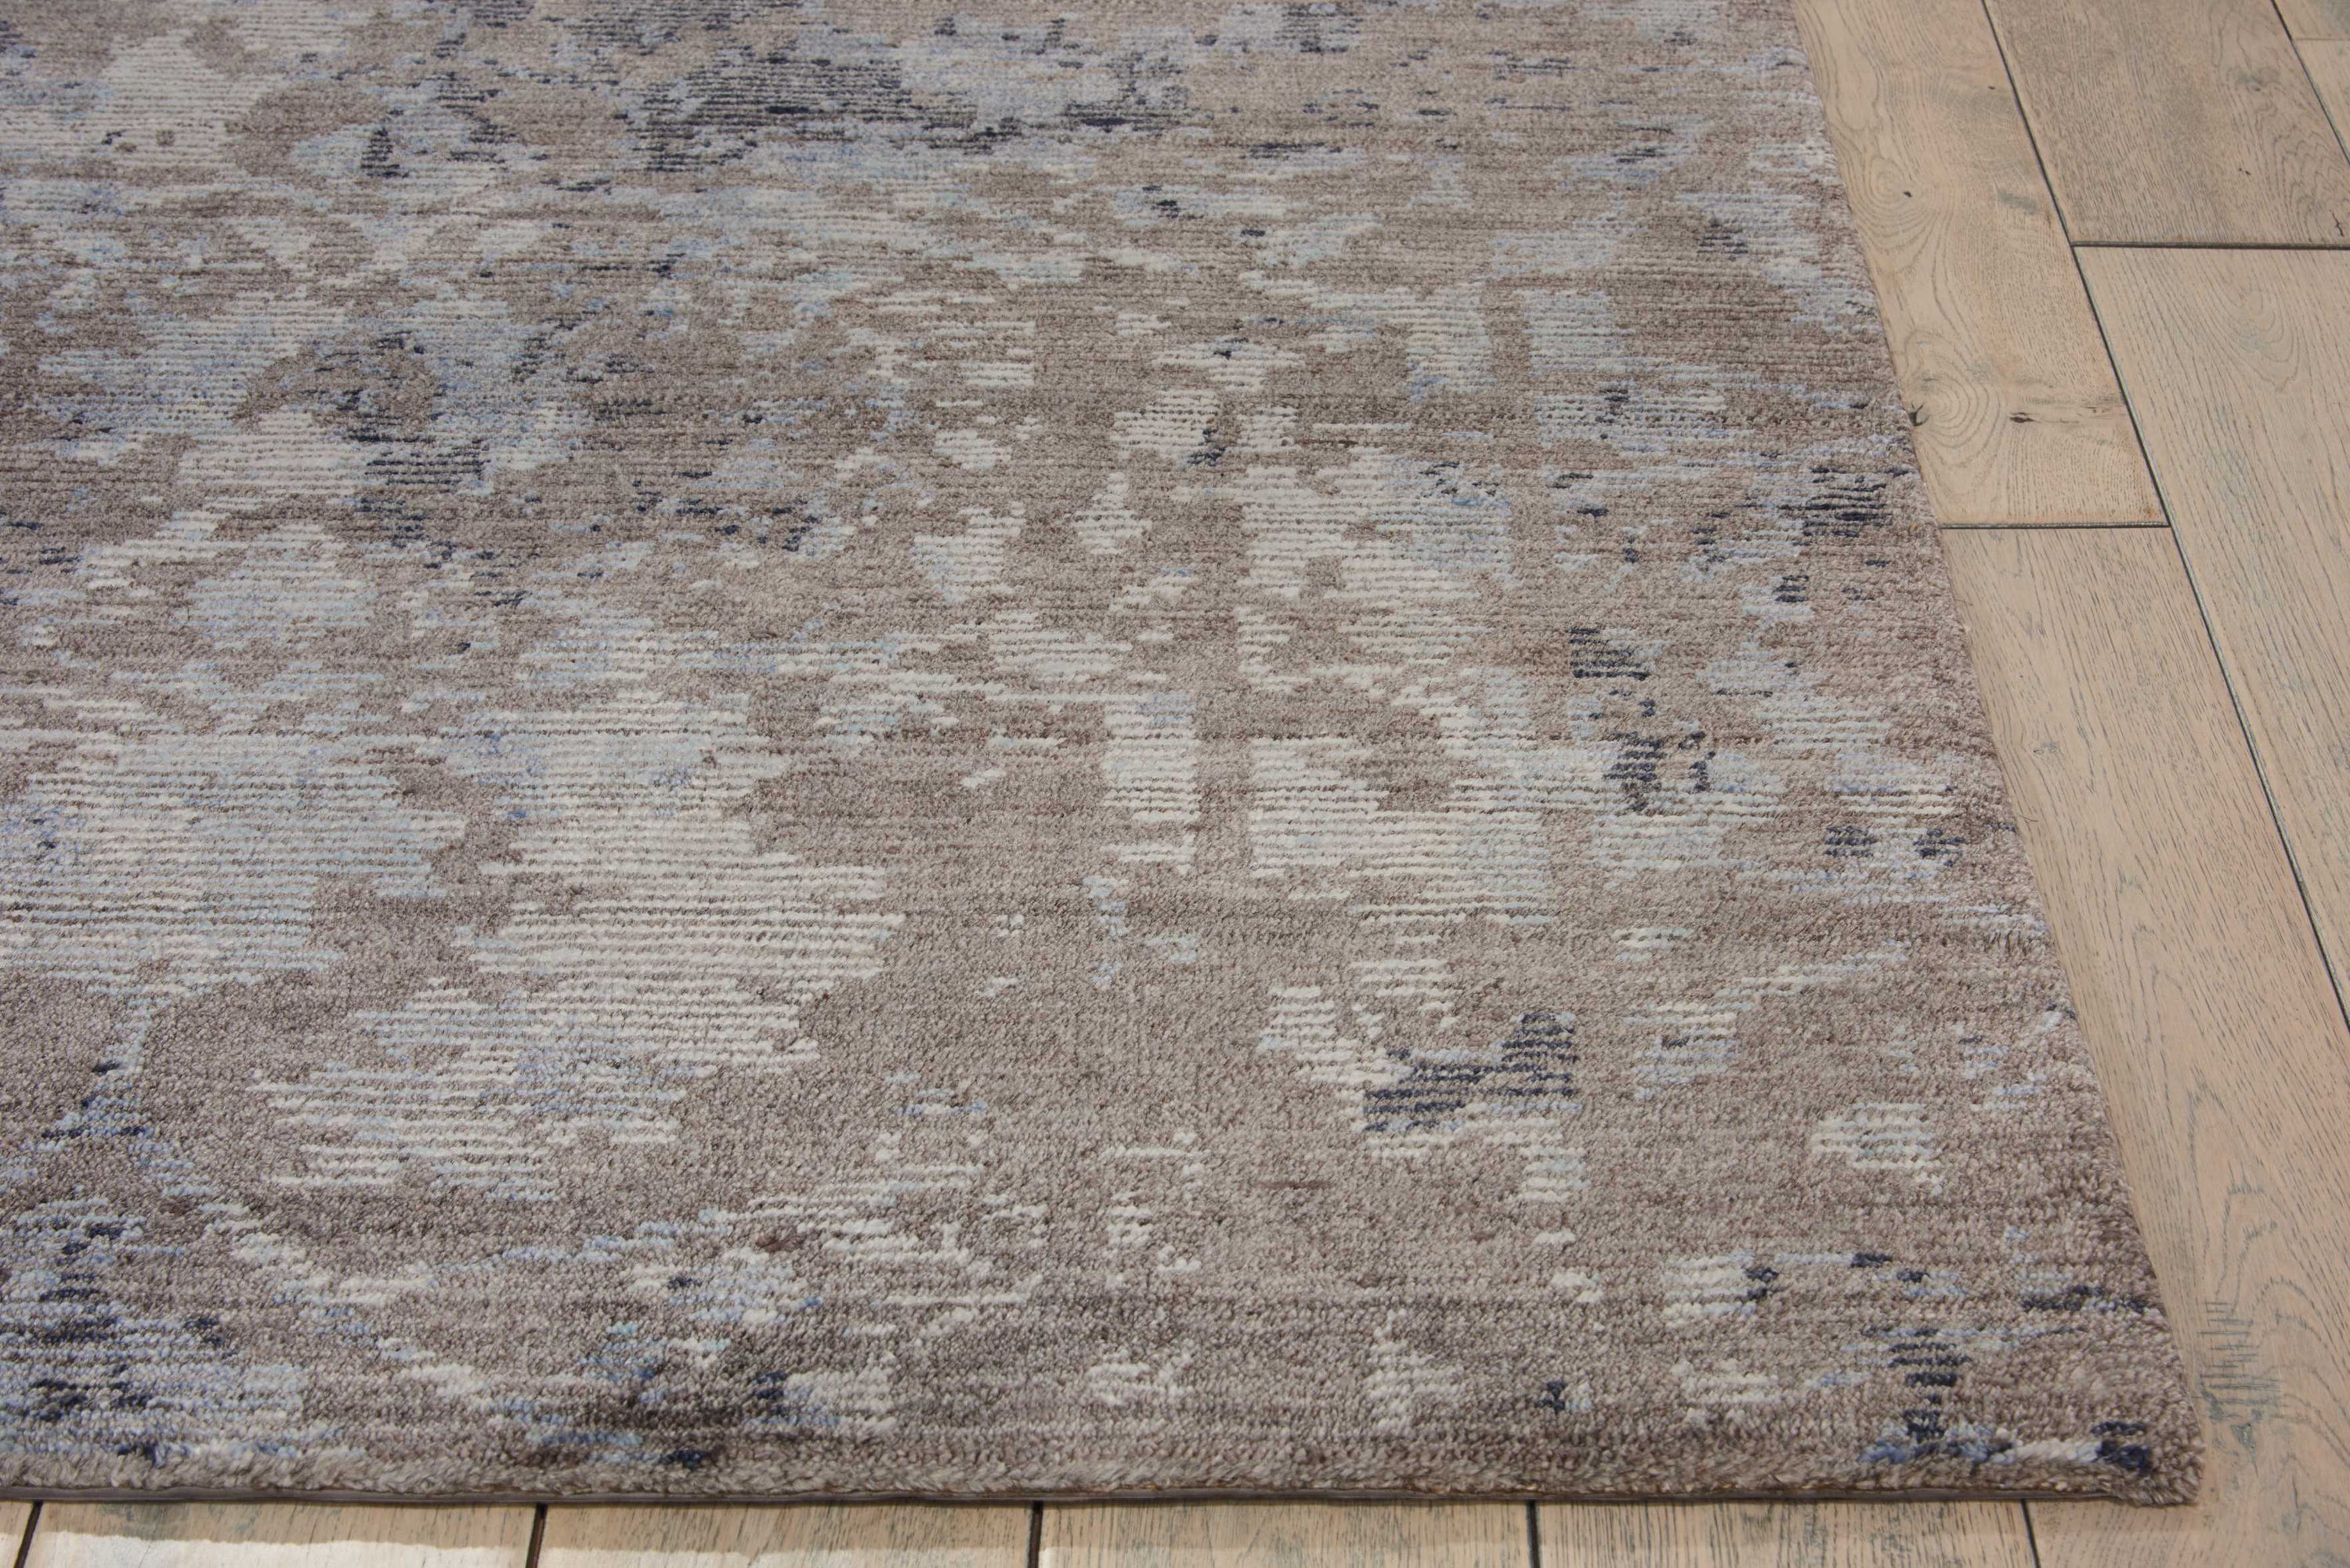 Patterned area rug with distressed design on wooden floor.